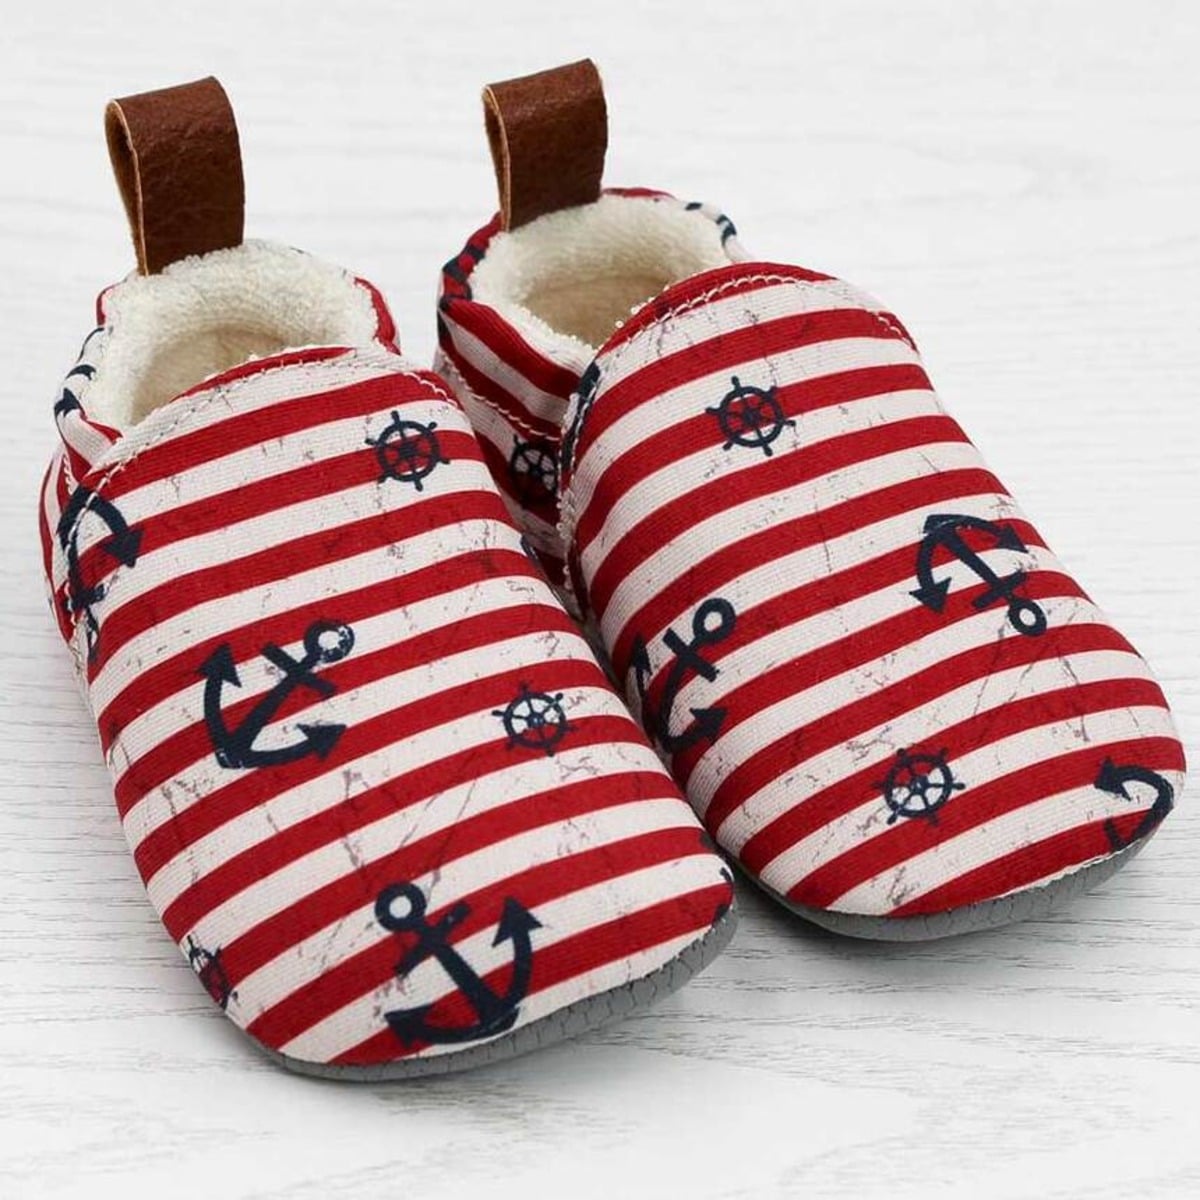 pololo-textile-slippers-seaqual-yarn-anchor-frontal-1200-1200